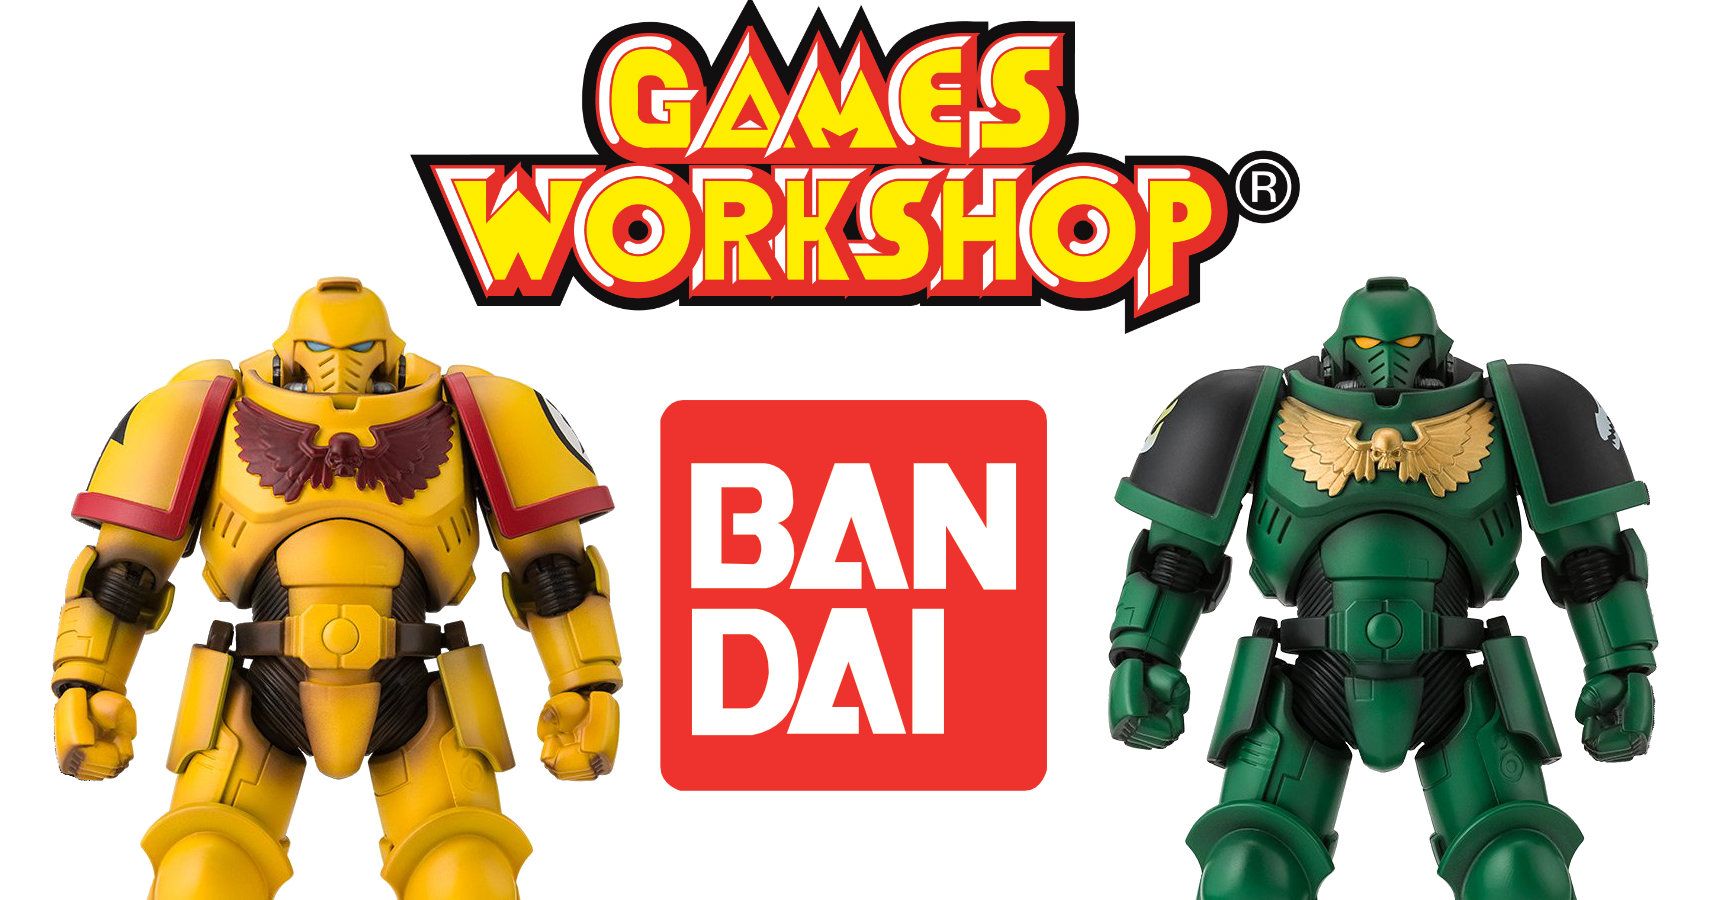 Bandai Gives Limited Window To Order Space Marine Action Figures